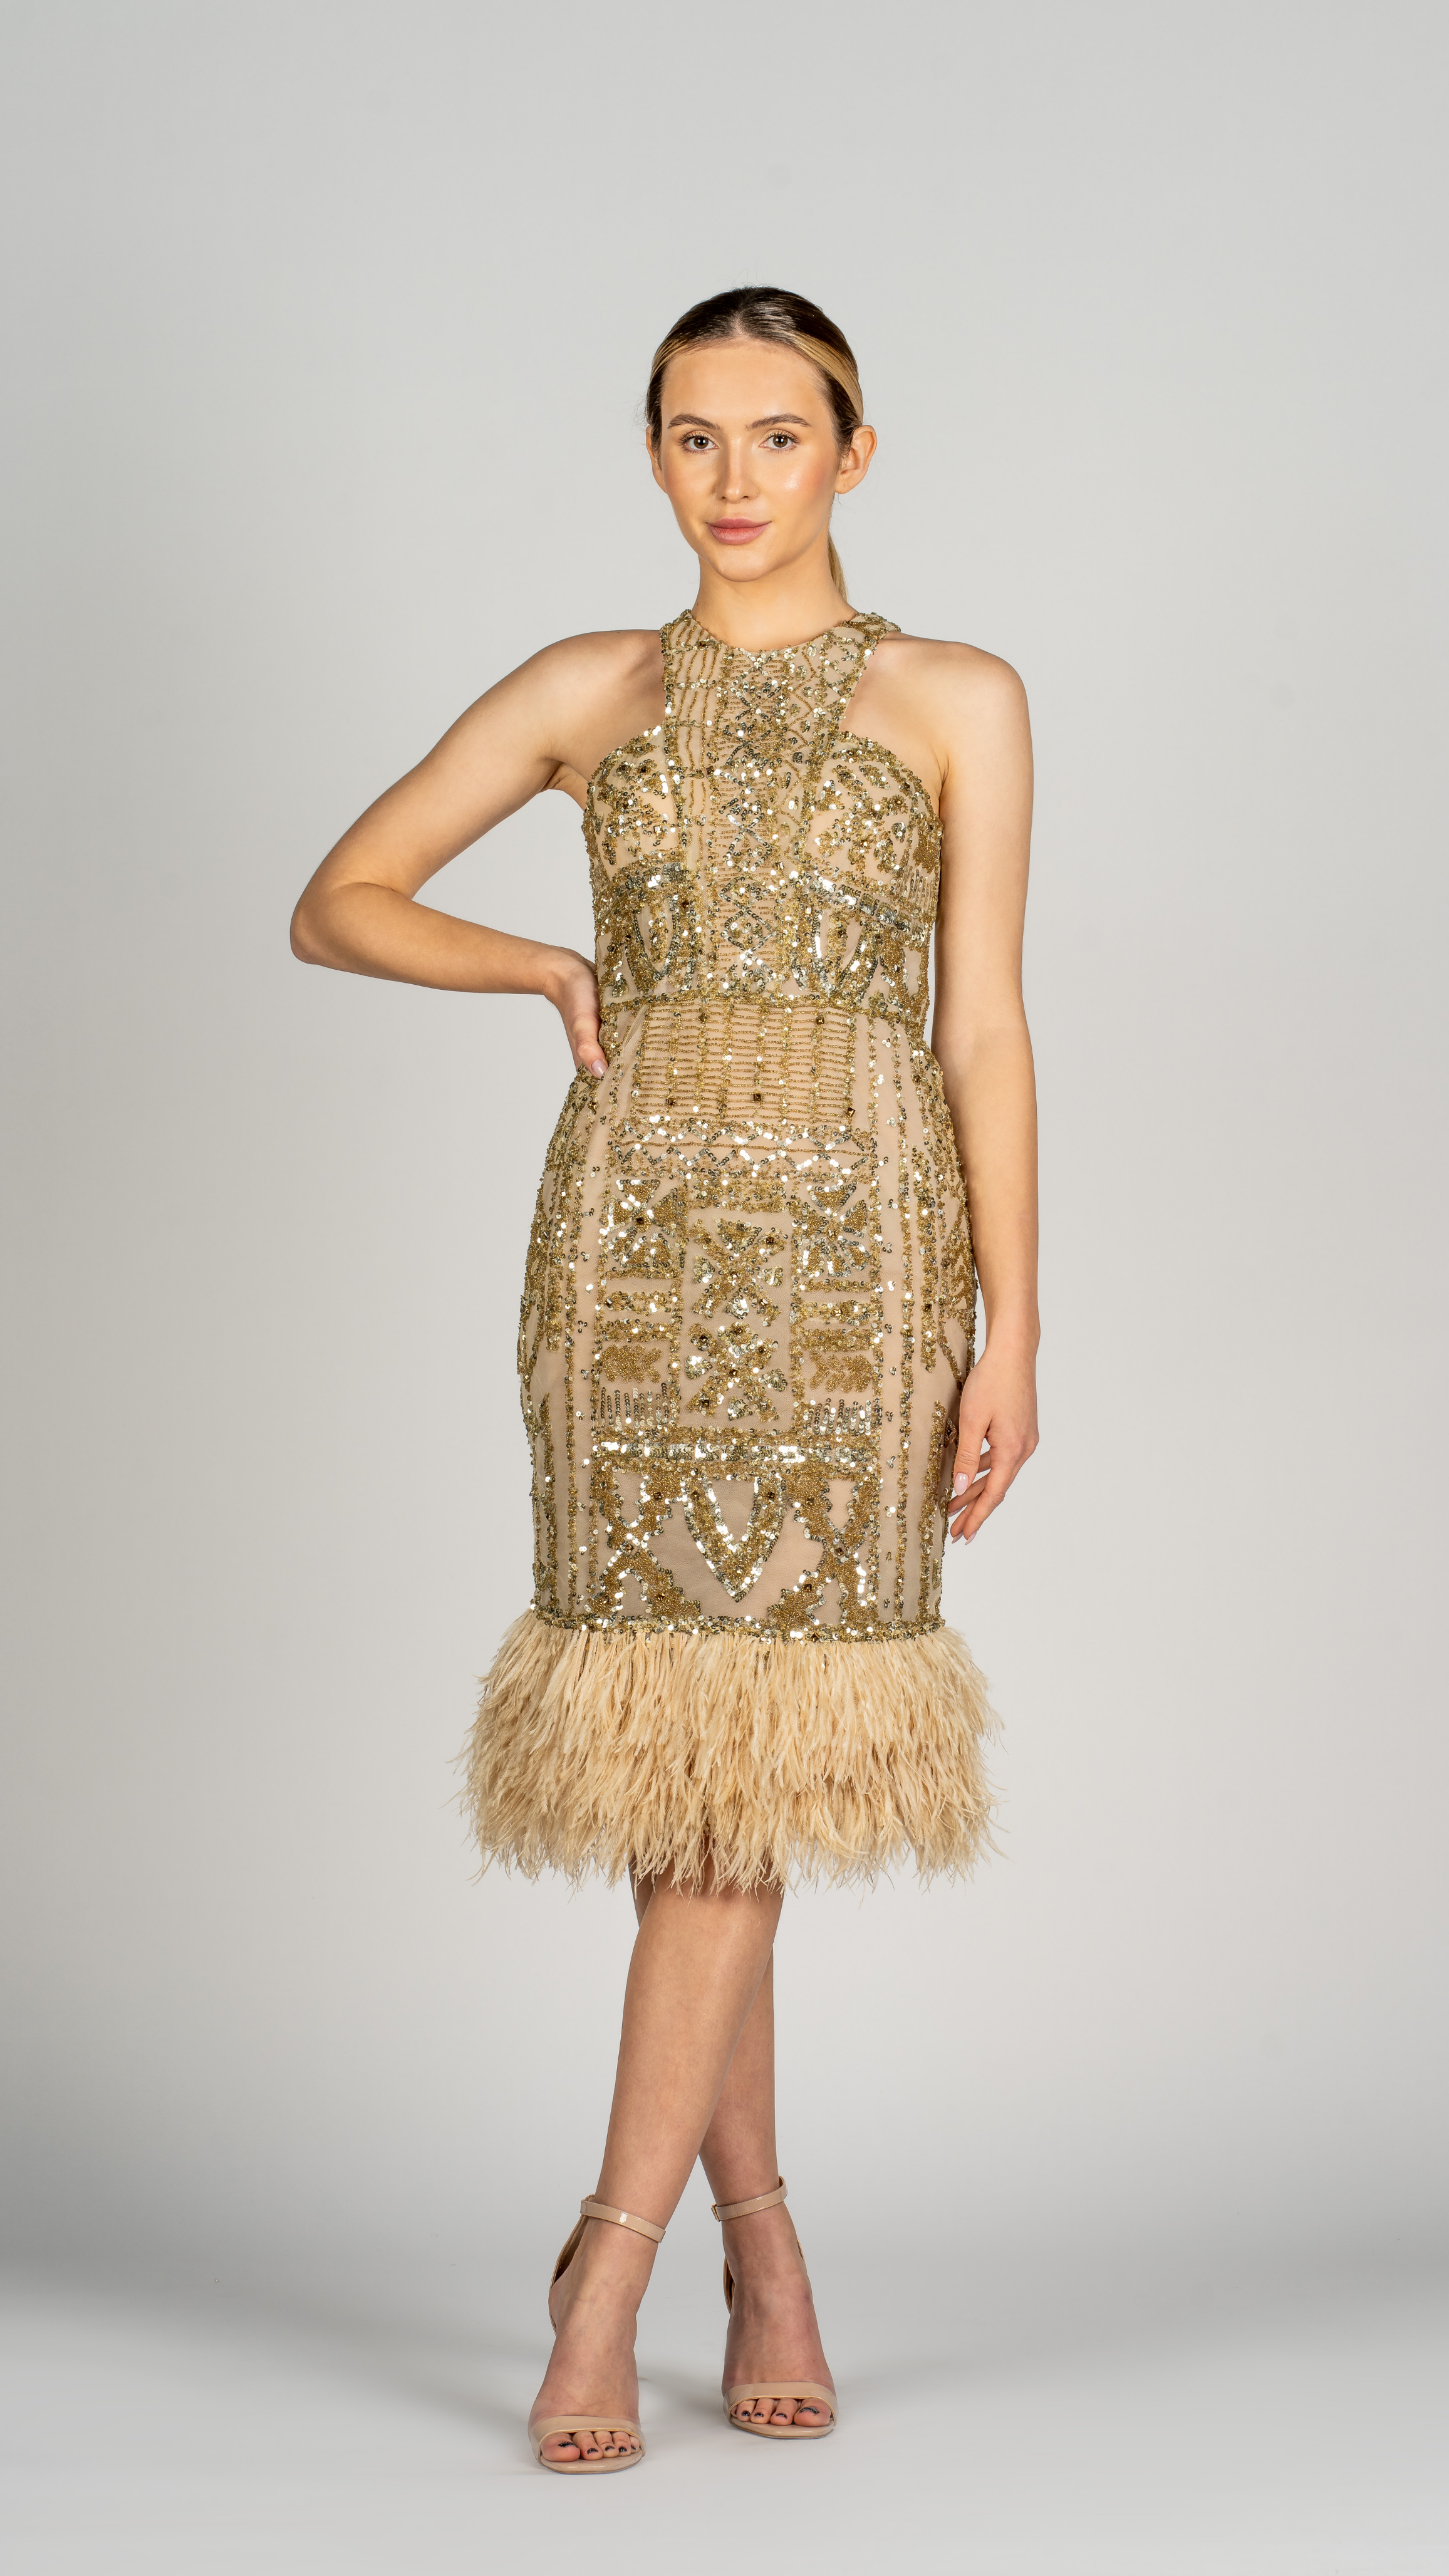 Midi Cocktail Dress with Feathers on the Hemline